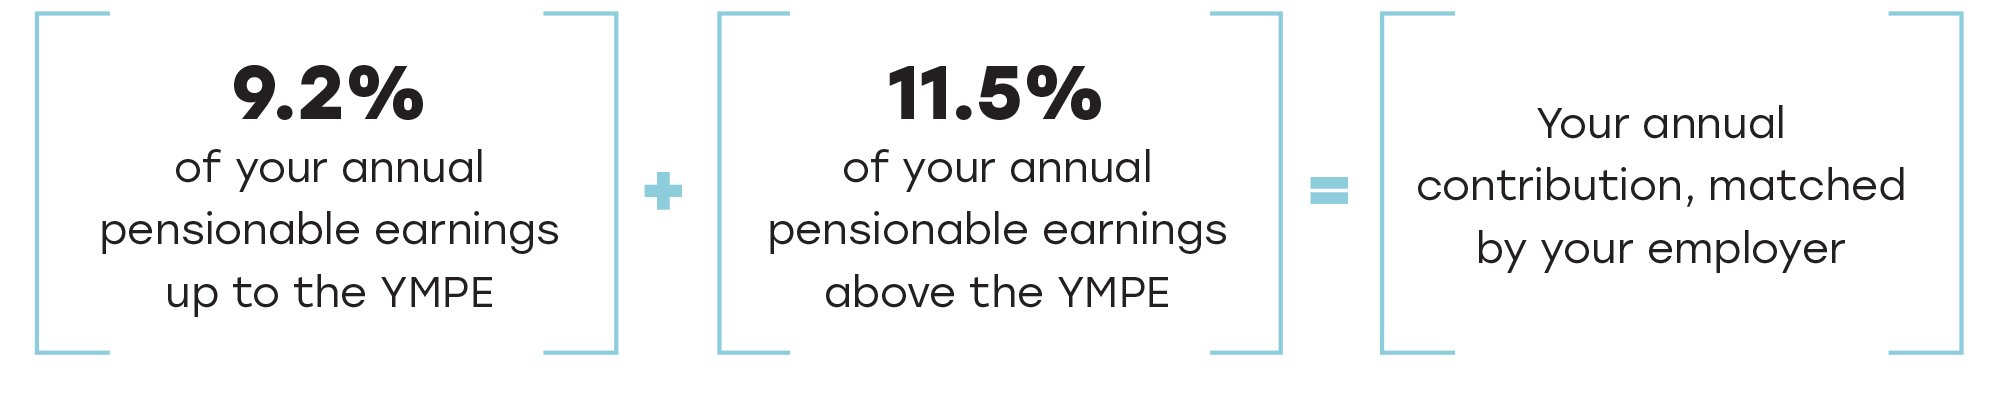 Your annual contribution matched by your employer equals 9.2% of your annual pensionable earnings up to the YMPE plus 11.5% of your annual pensionable earnings above the YMPE